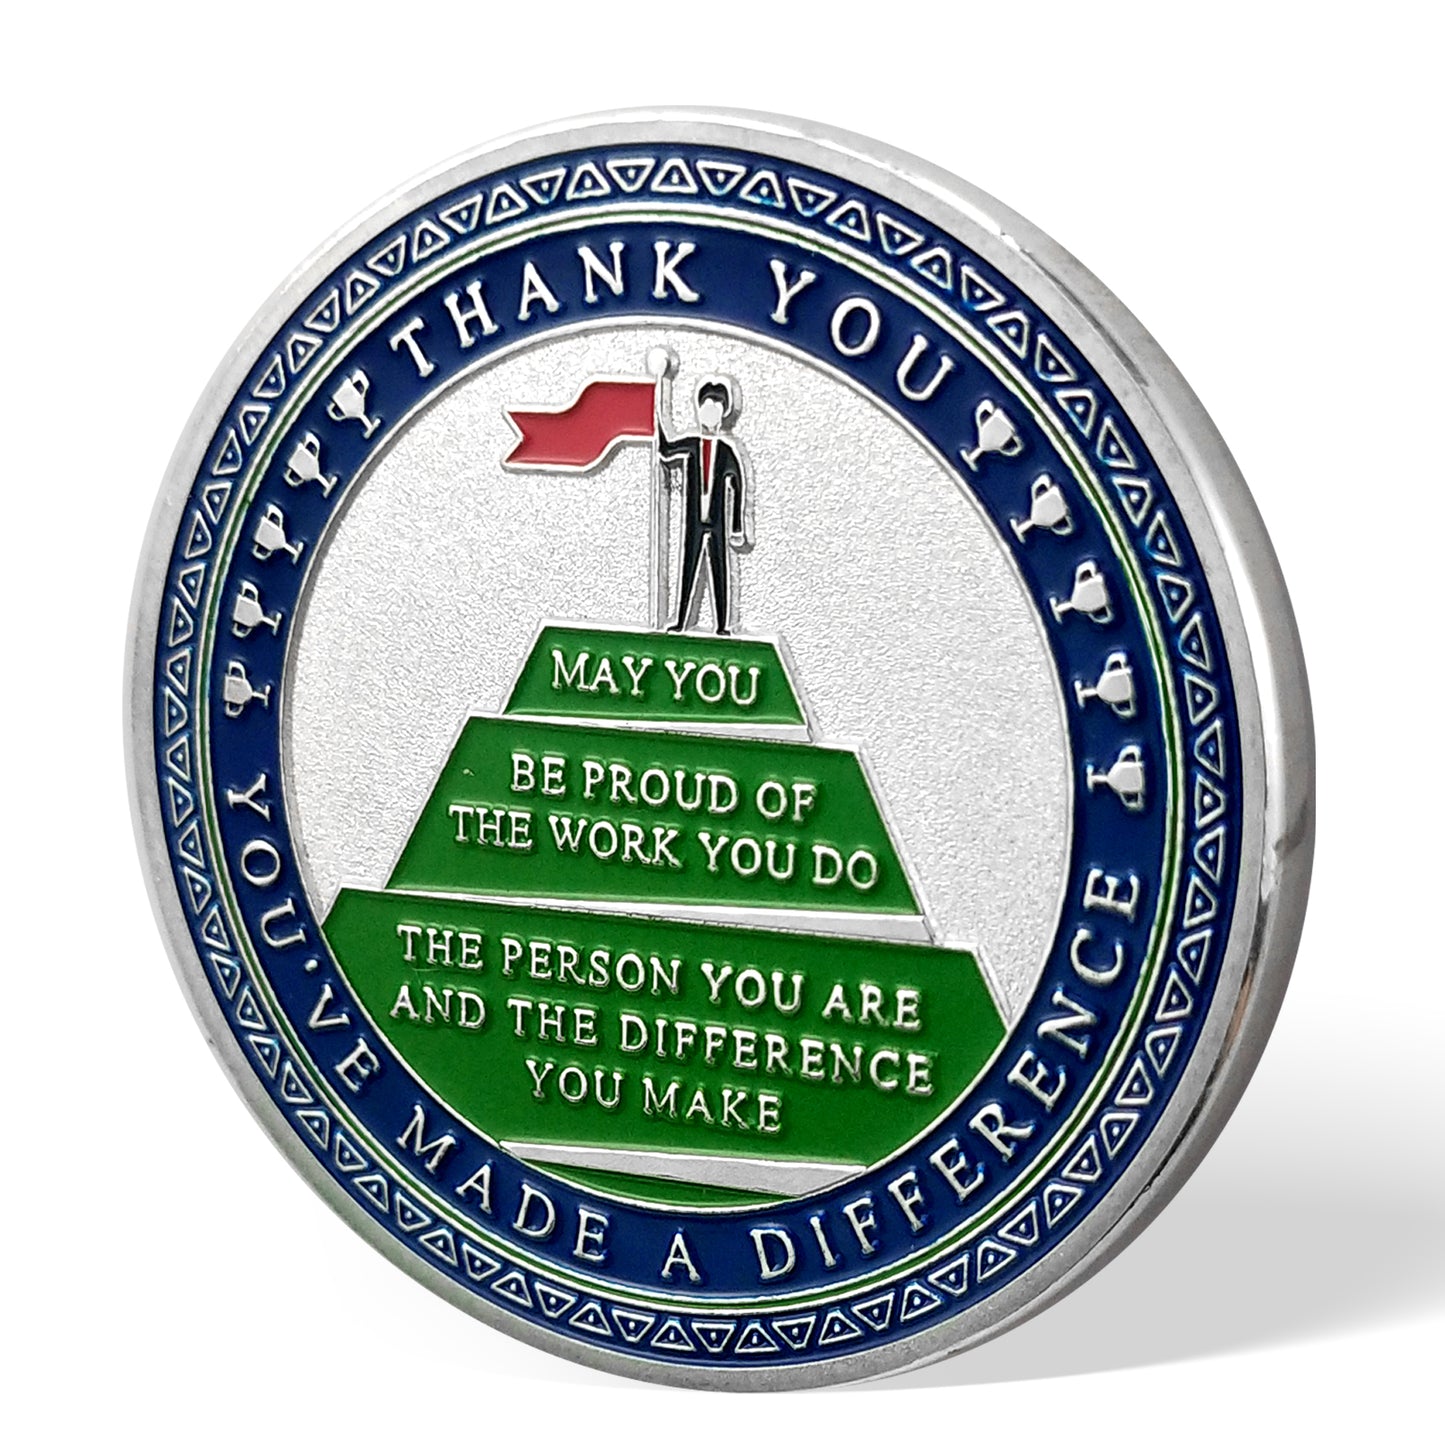 Encouragement Challenge Coin-Employee Appreciation Gifts Inspirational Thank You Coin for Students and Cowokers-Green Arrow